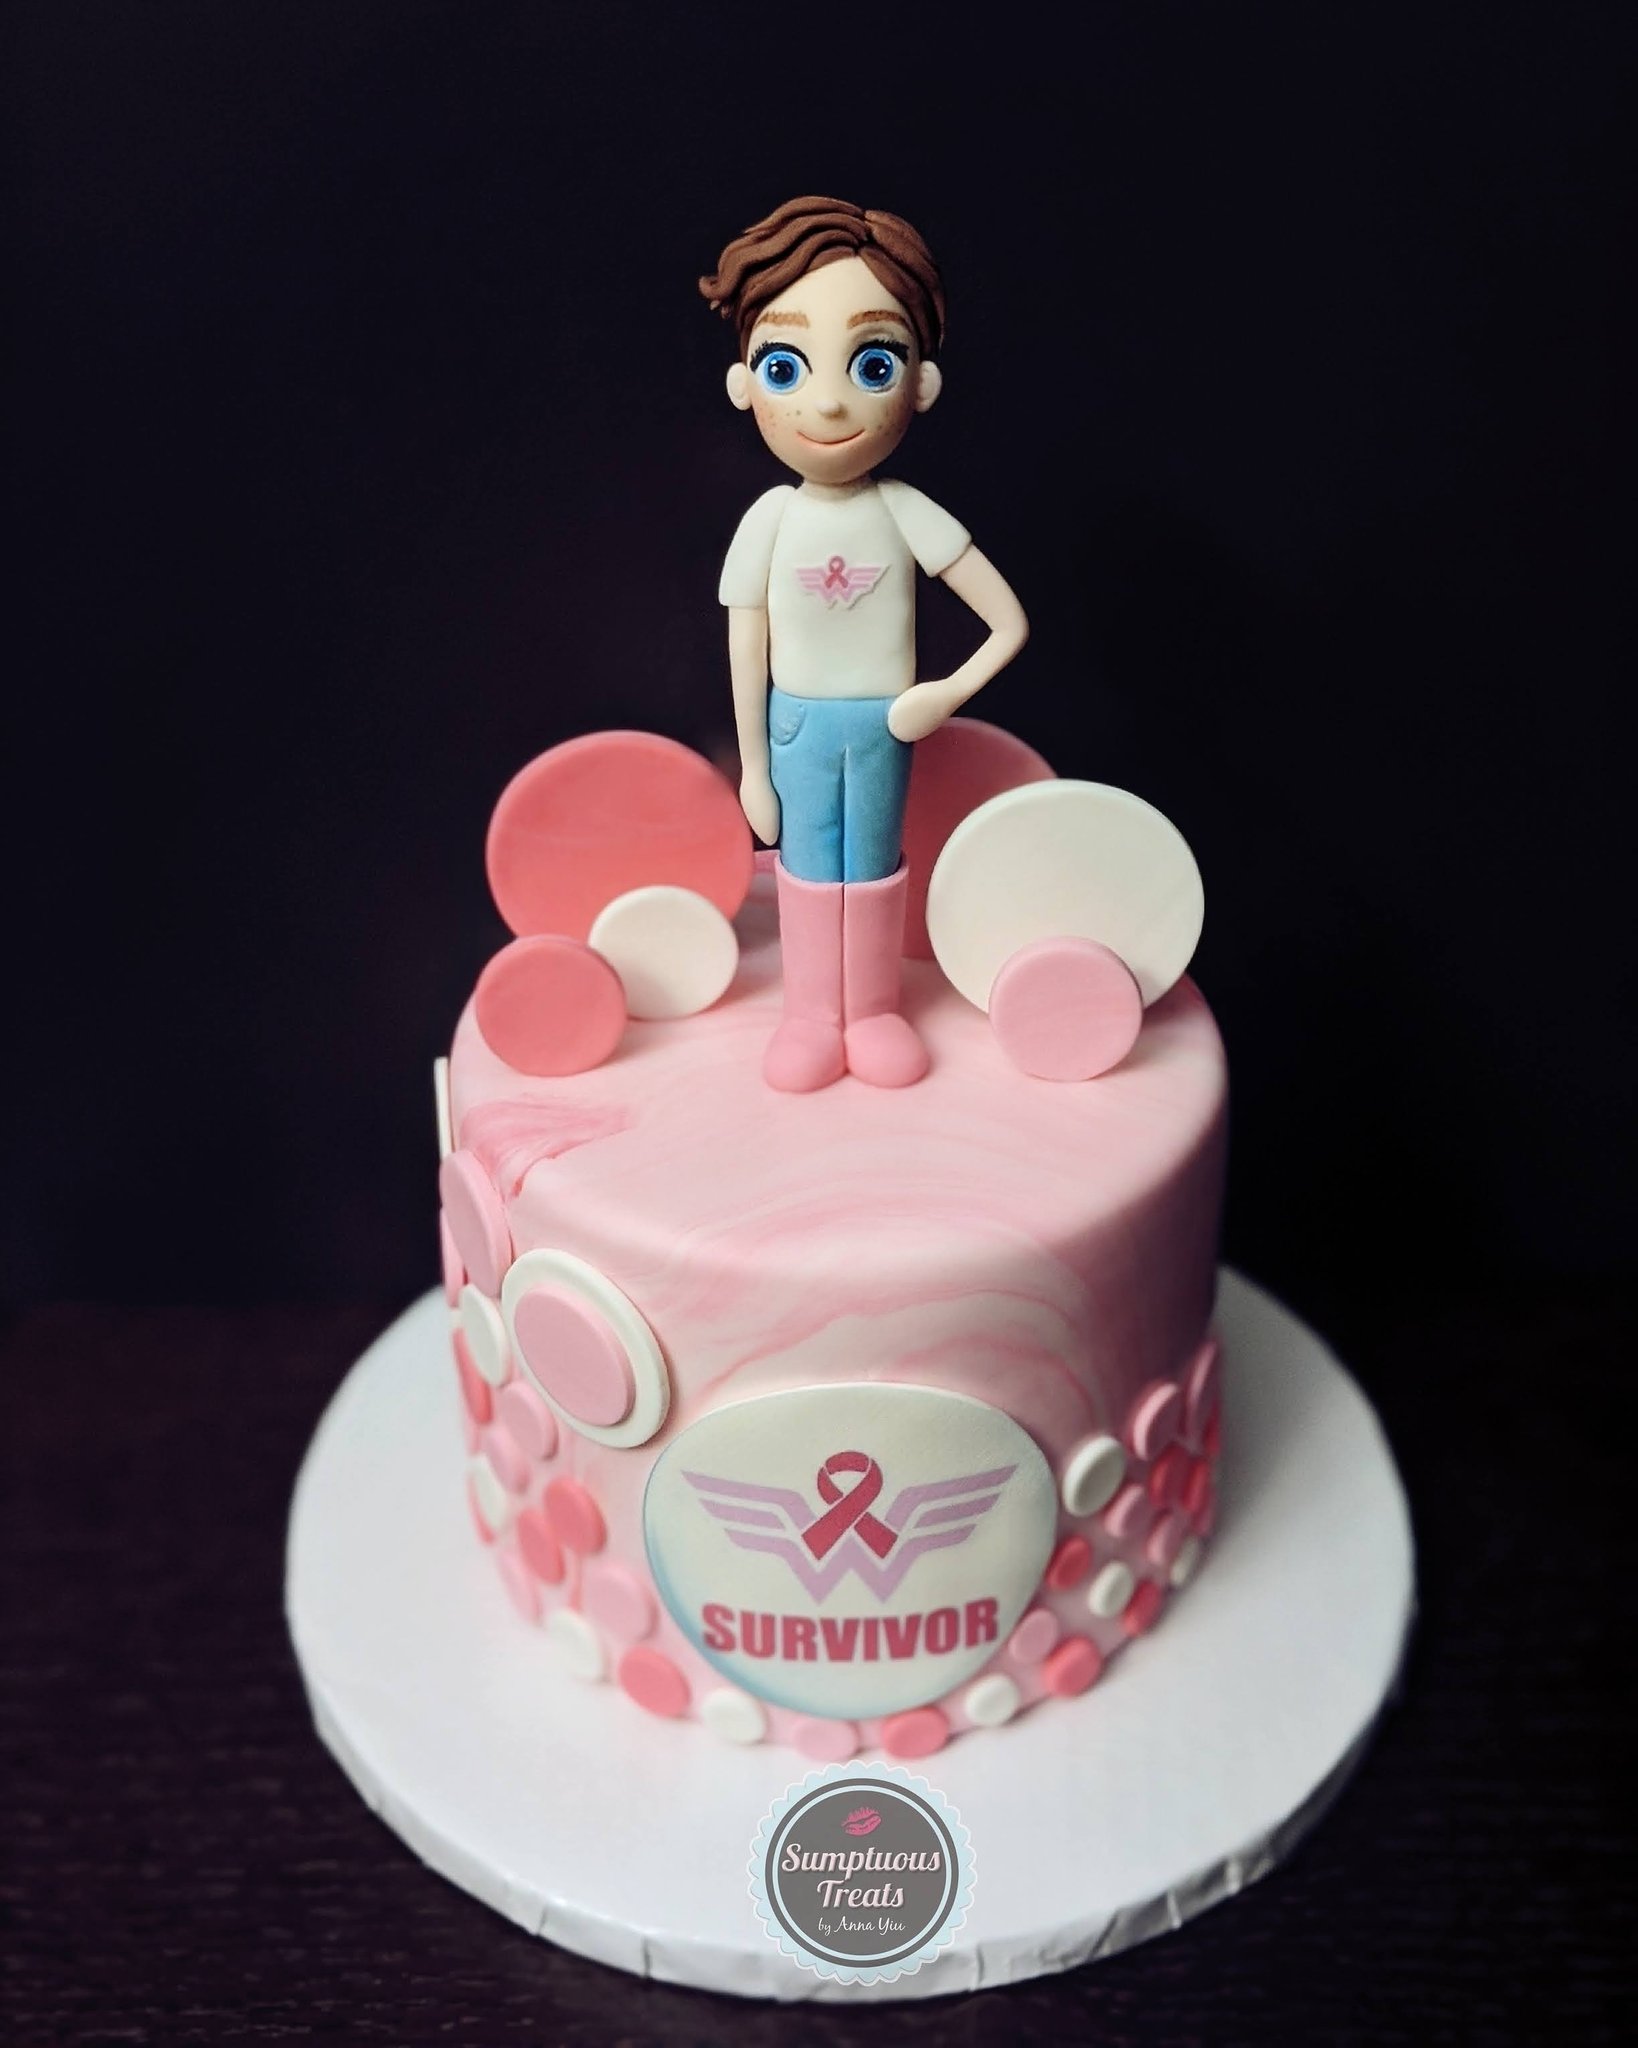 Everything Iced Cakes & Creamery - Breast Cancer Awareness Boob Cake  #breastcancerawareness #everythingicedknoxville